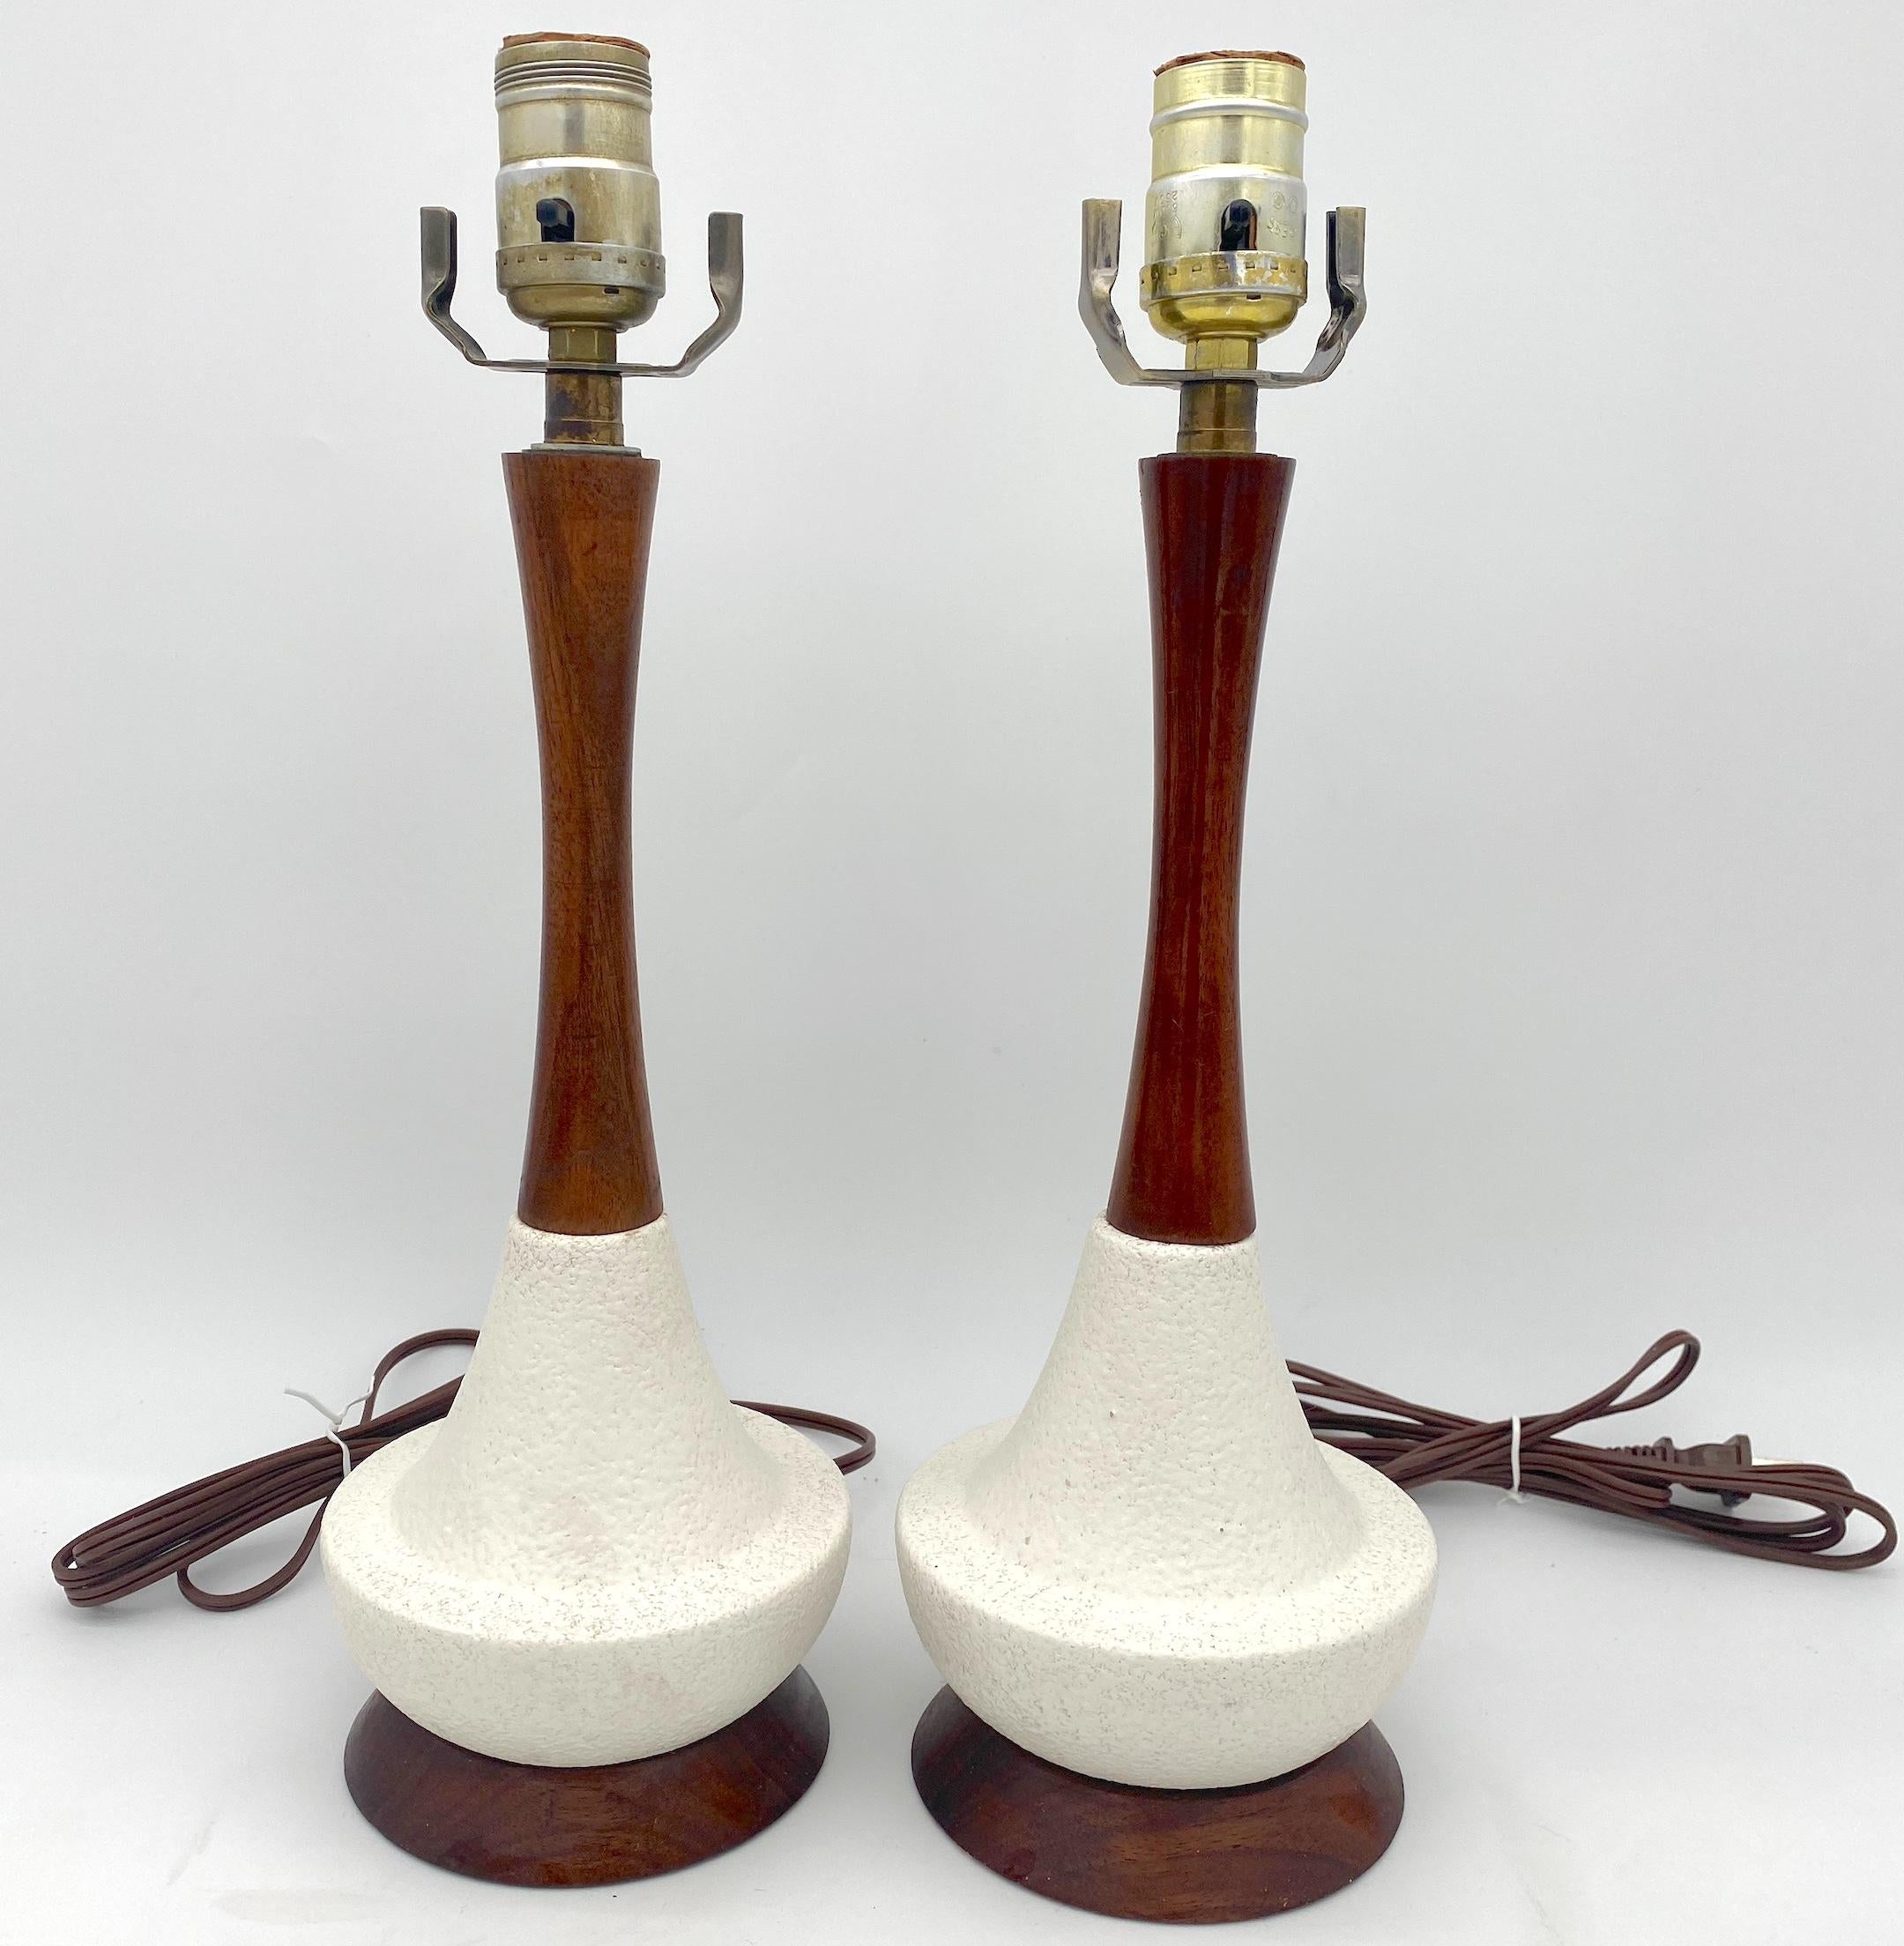 Diminutive  Pair of Danish Modern Carved Teak Wood & White Porcelain Lamps 
Denmark, circa 1960s

Illuminate your space with this charming pair of Diminutive Danish Modern Carved Teak Wood & White Porcelain Lamps from the 1960s. Crafted in Denmark,